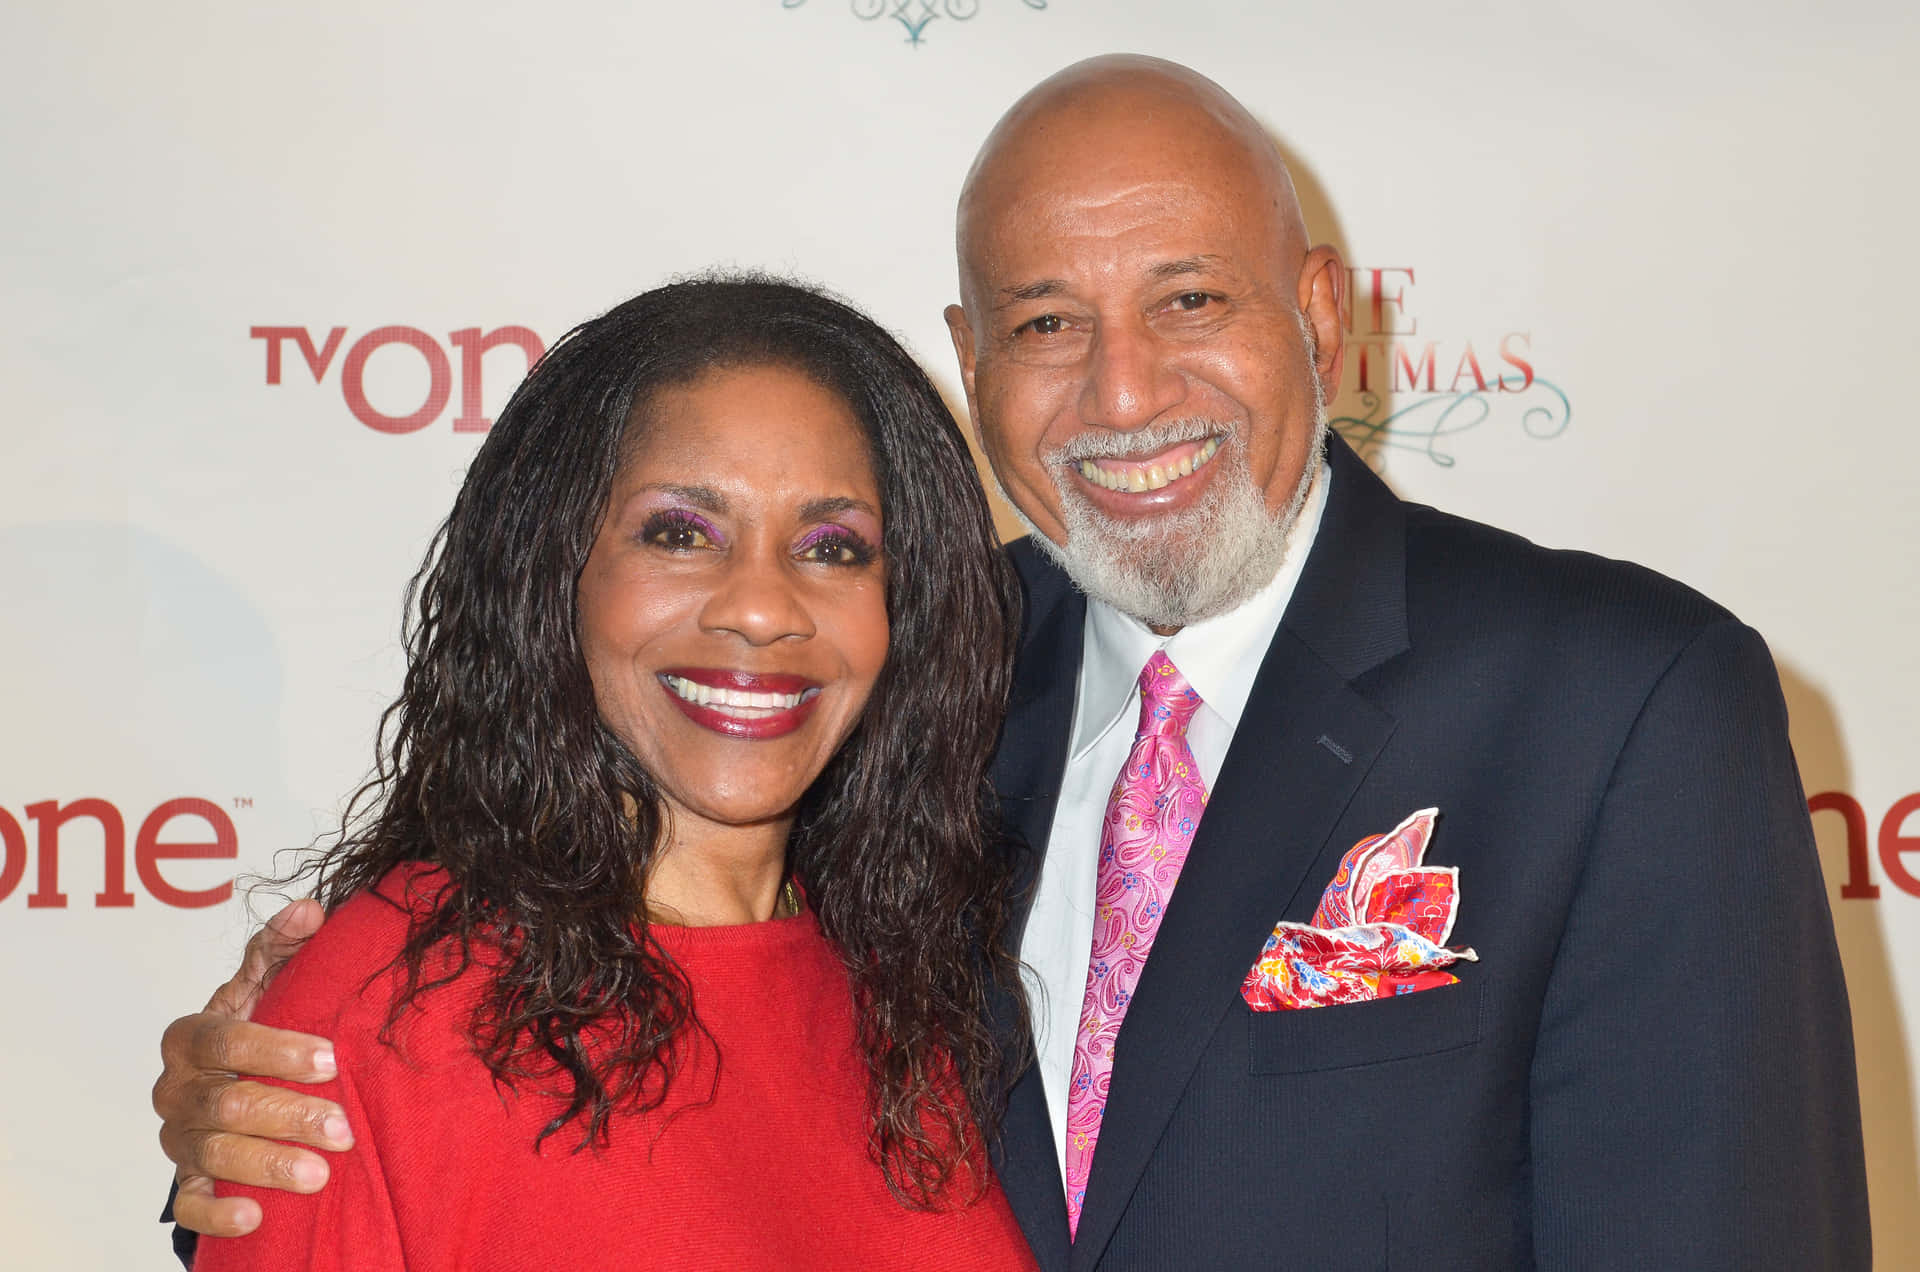 Congressman Alcee Hastings and Patricia Williams at a public event Wallpaper